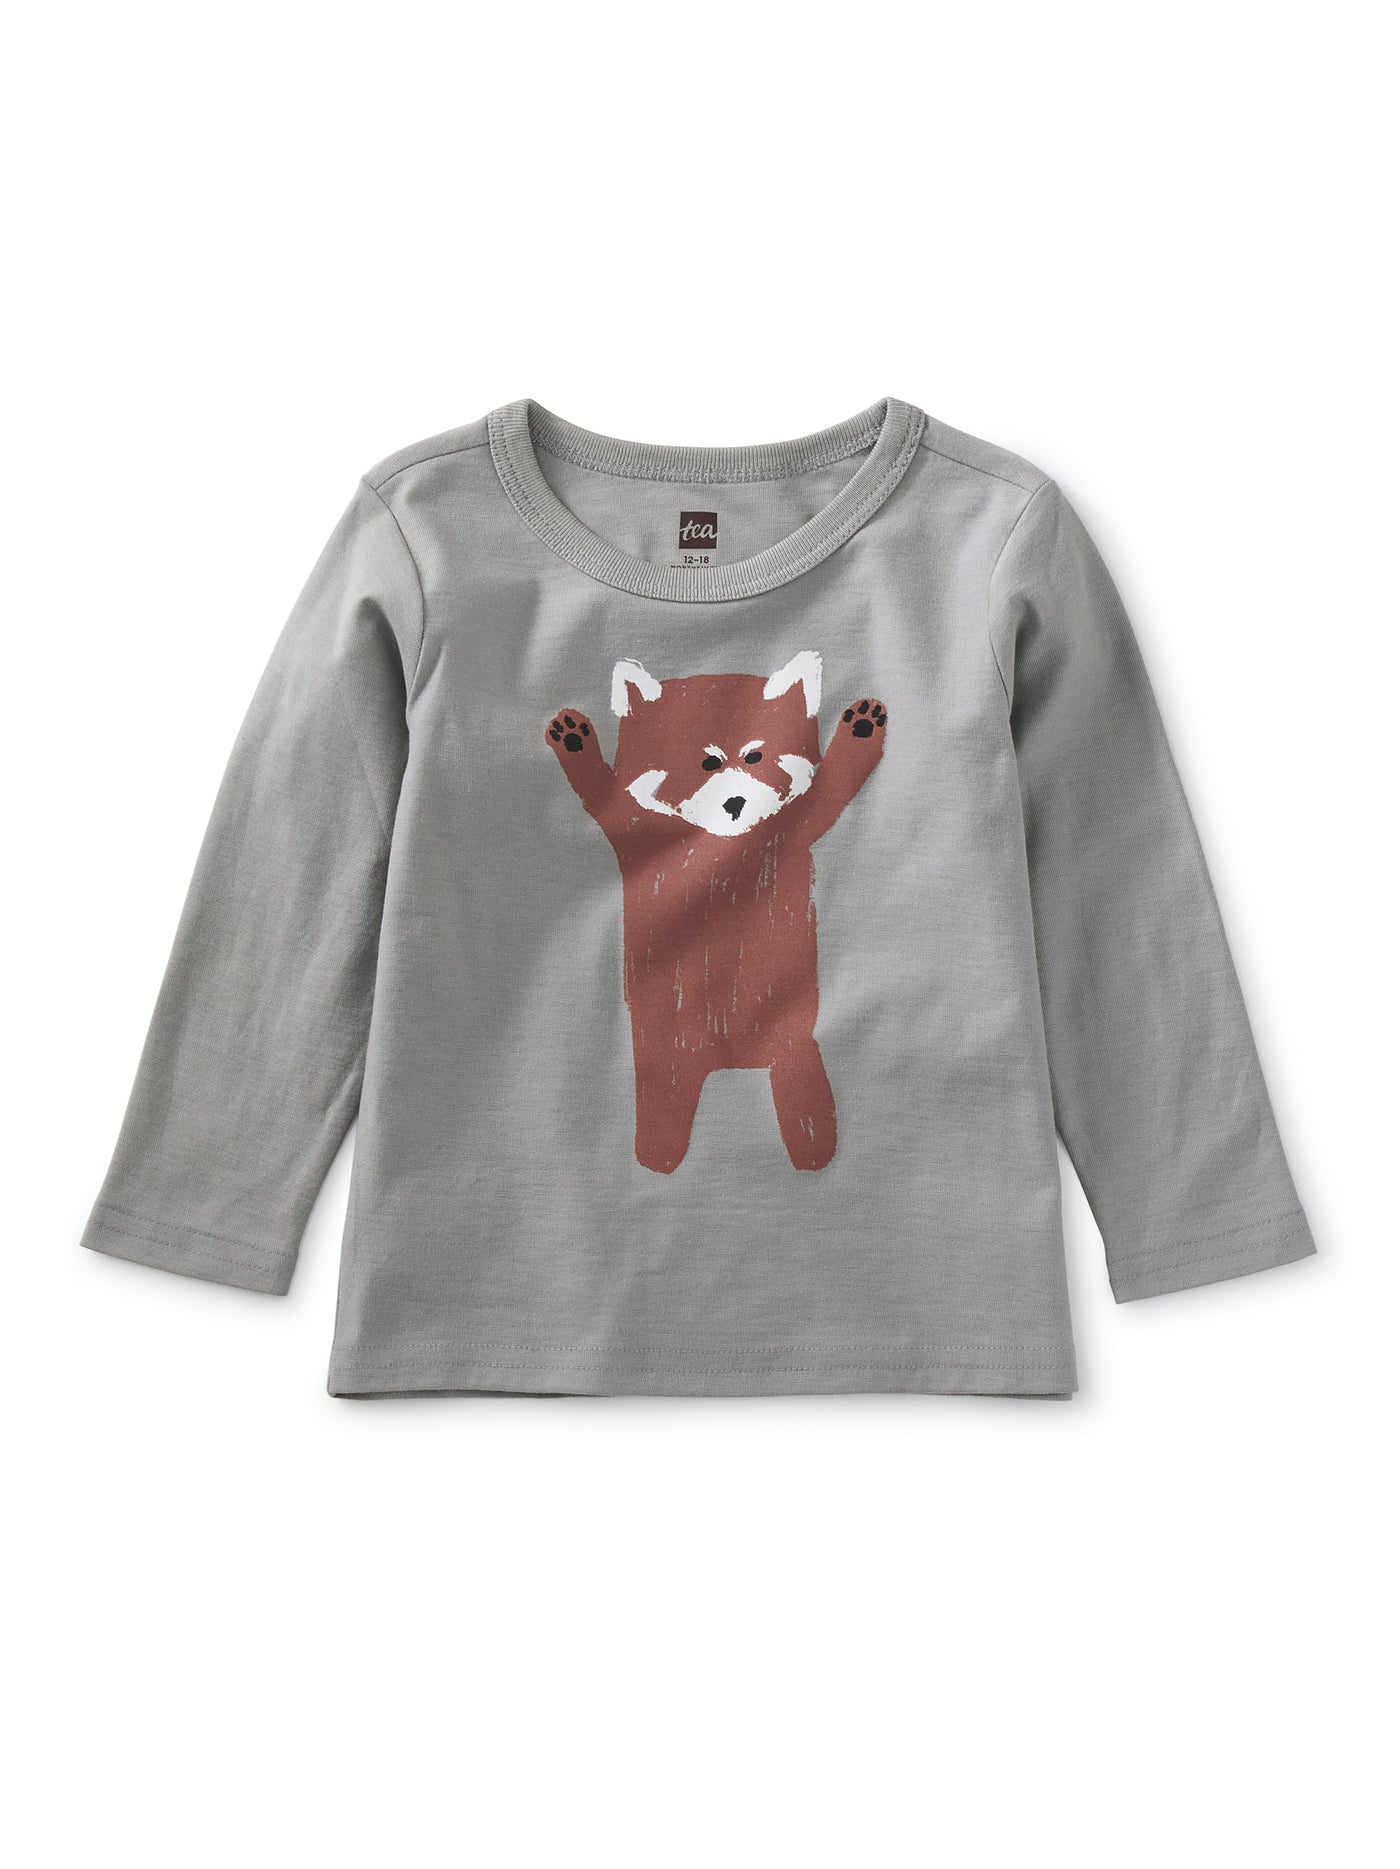 Tea Collection Baby Graphic Long Sleeve Tee + More Colors